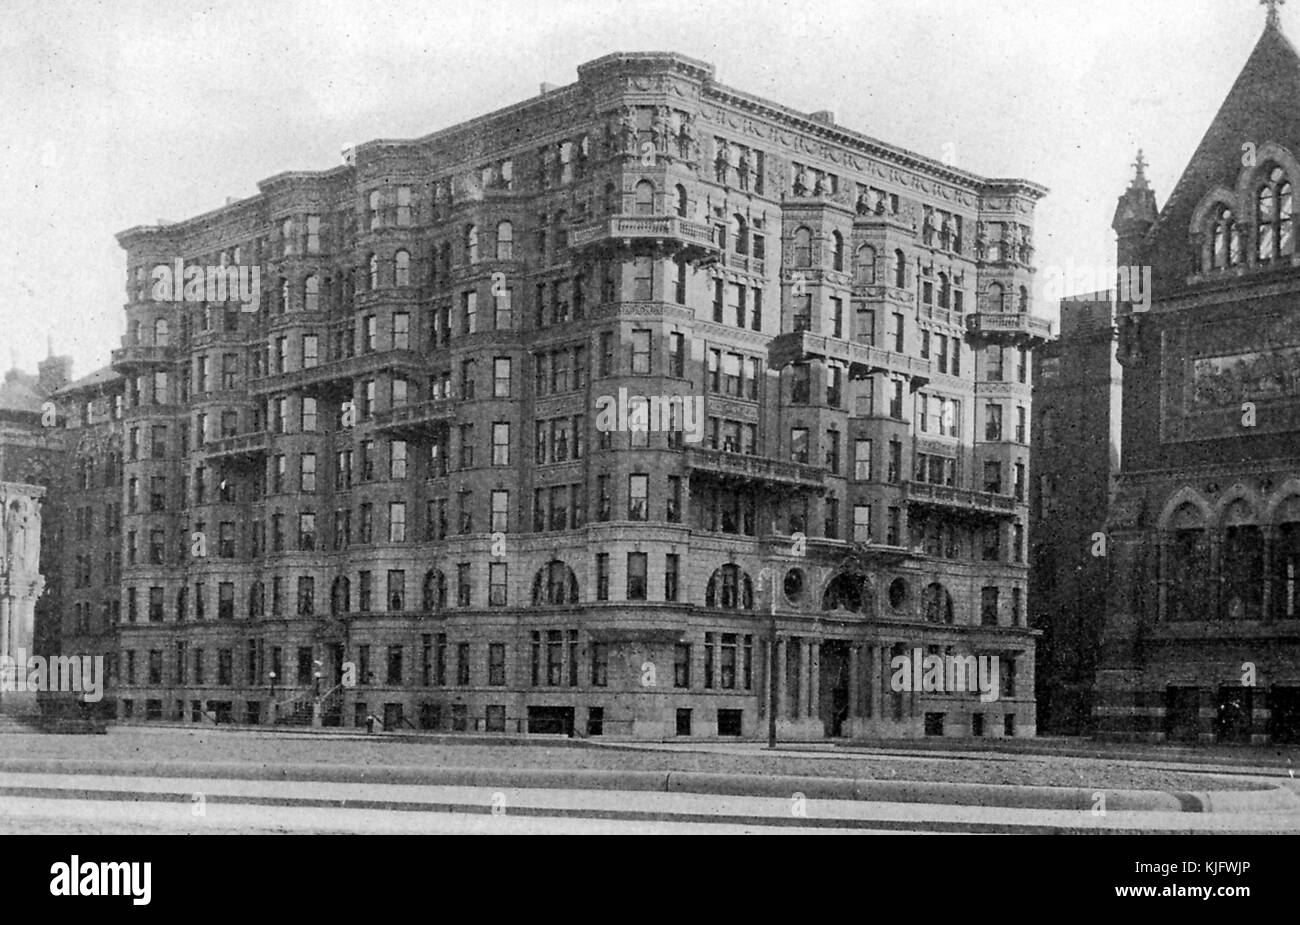 Photograph of the Hotel Westminster, by developer Westminster Chambers, in Copley Square, which was the source of much controversy regarding building height laws, Boston, Massachusets, Boston, Massachusetts, 1913. Stock Photo